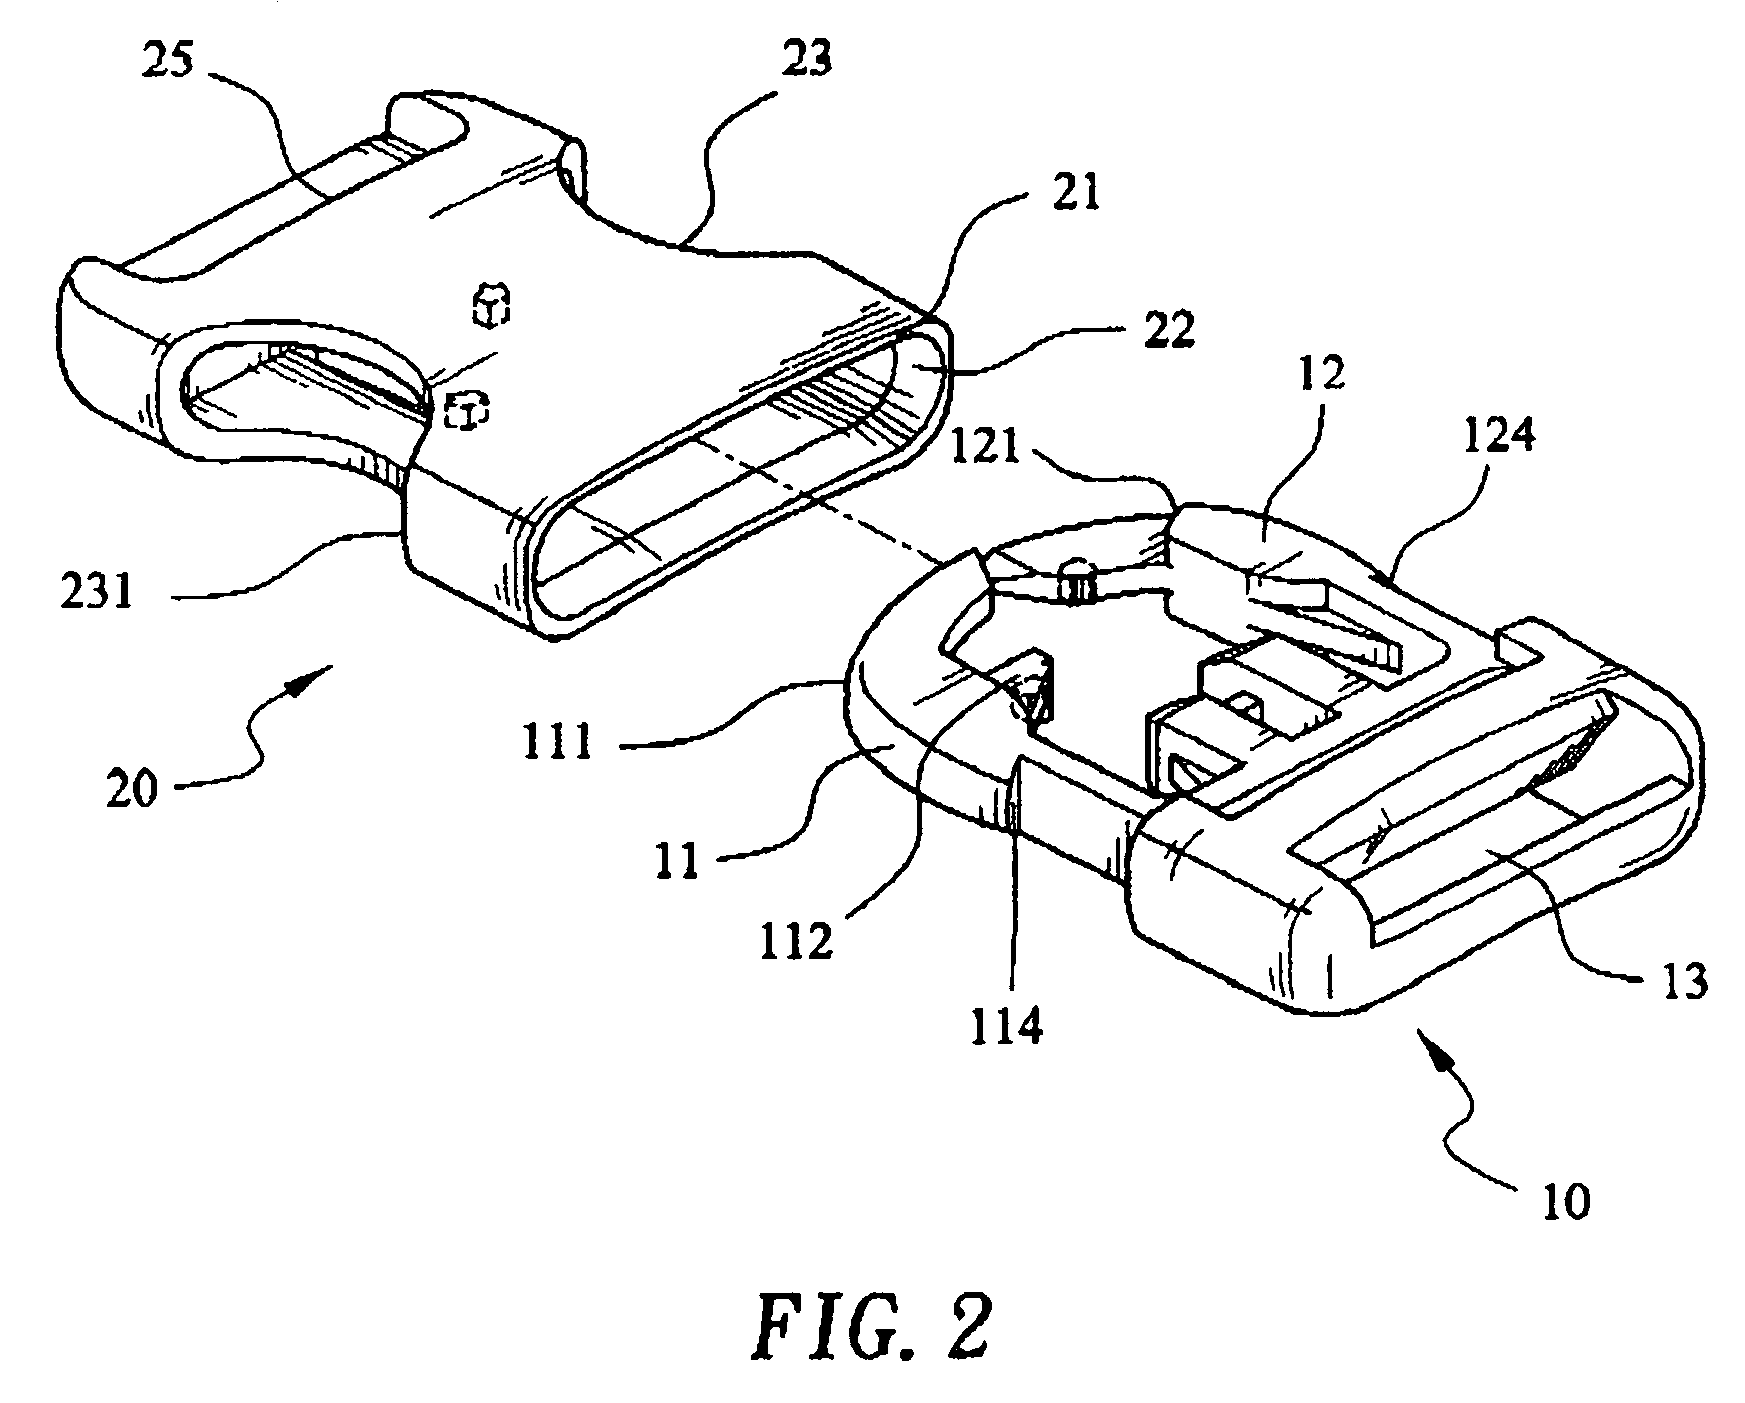 Side release buckle allowing locking from an angular position